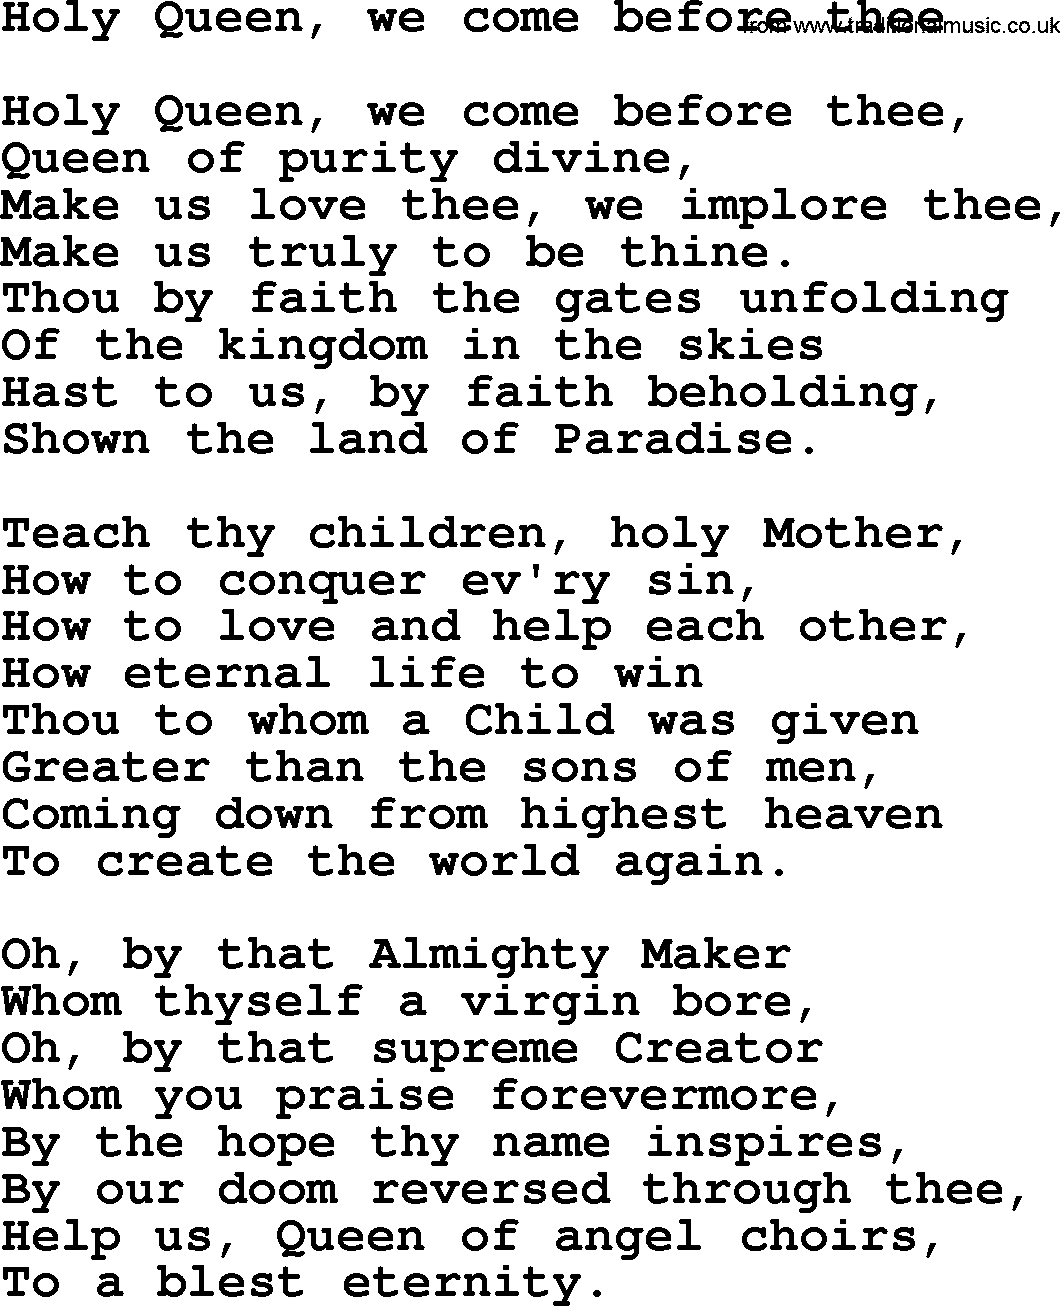 Catholic Hymn: Holy Queen, We Come Before Thee lyrics with PDF